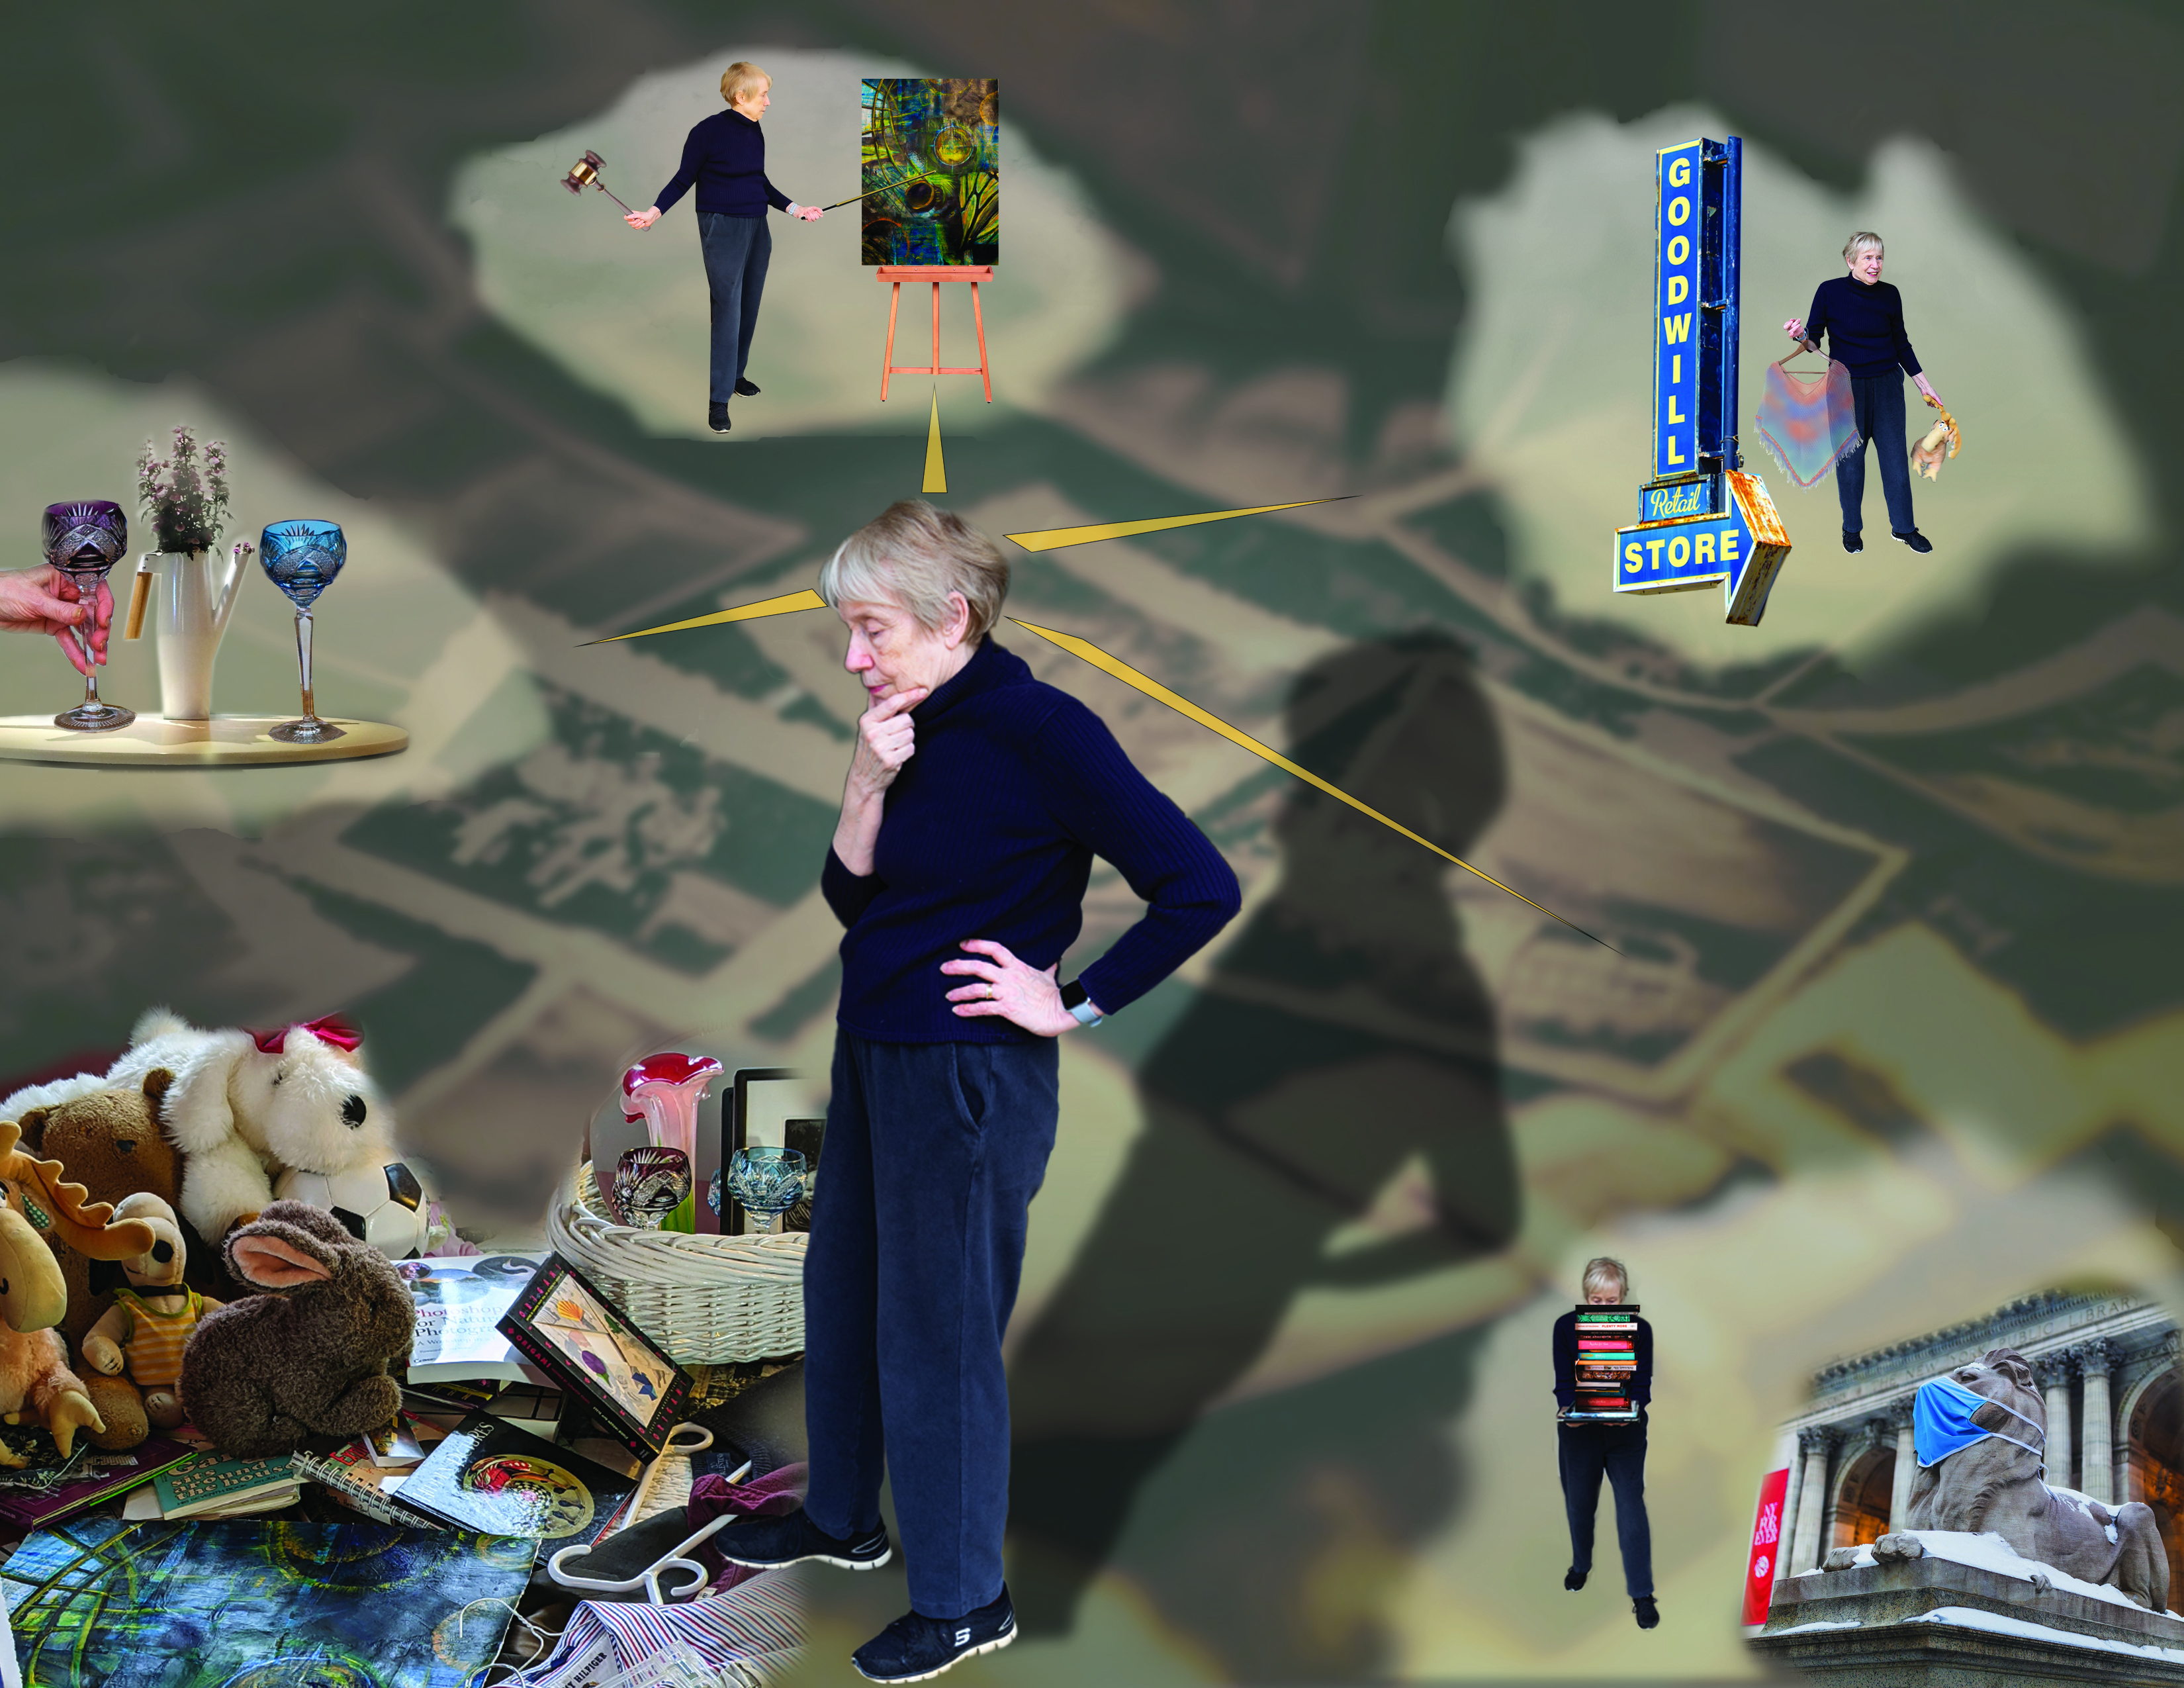 A digital collage-style illustration of a person going about various tasks and errands